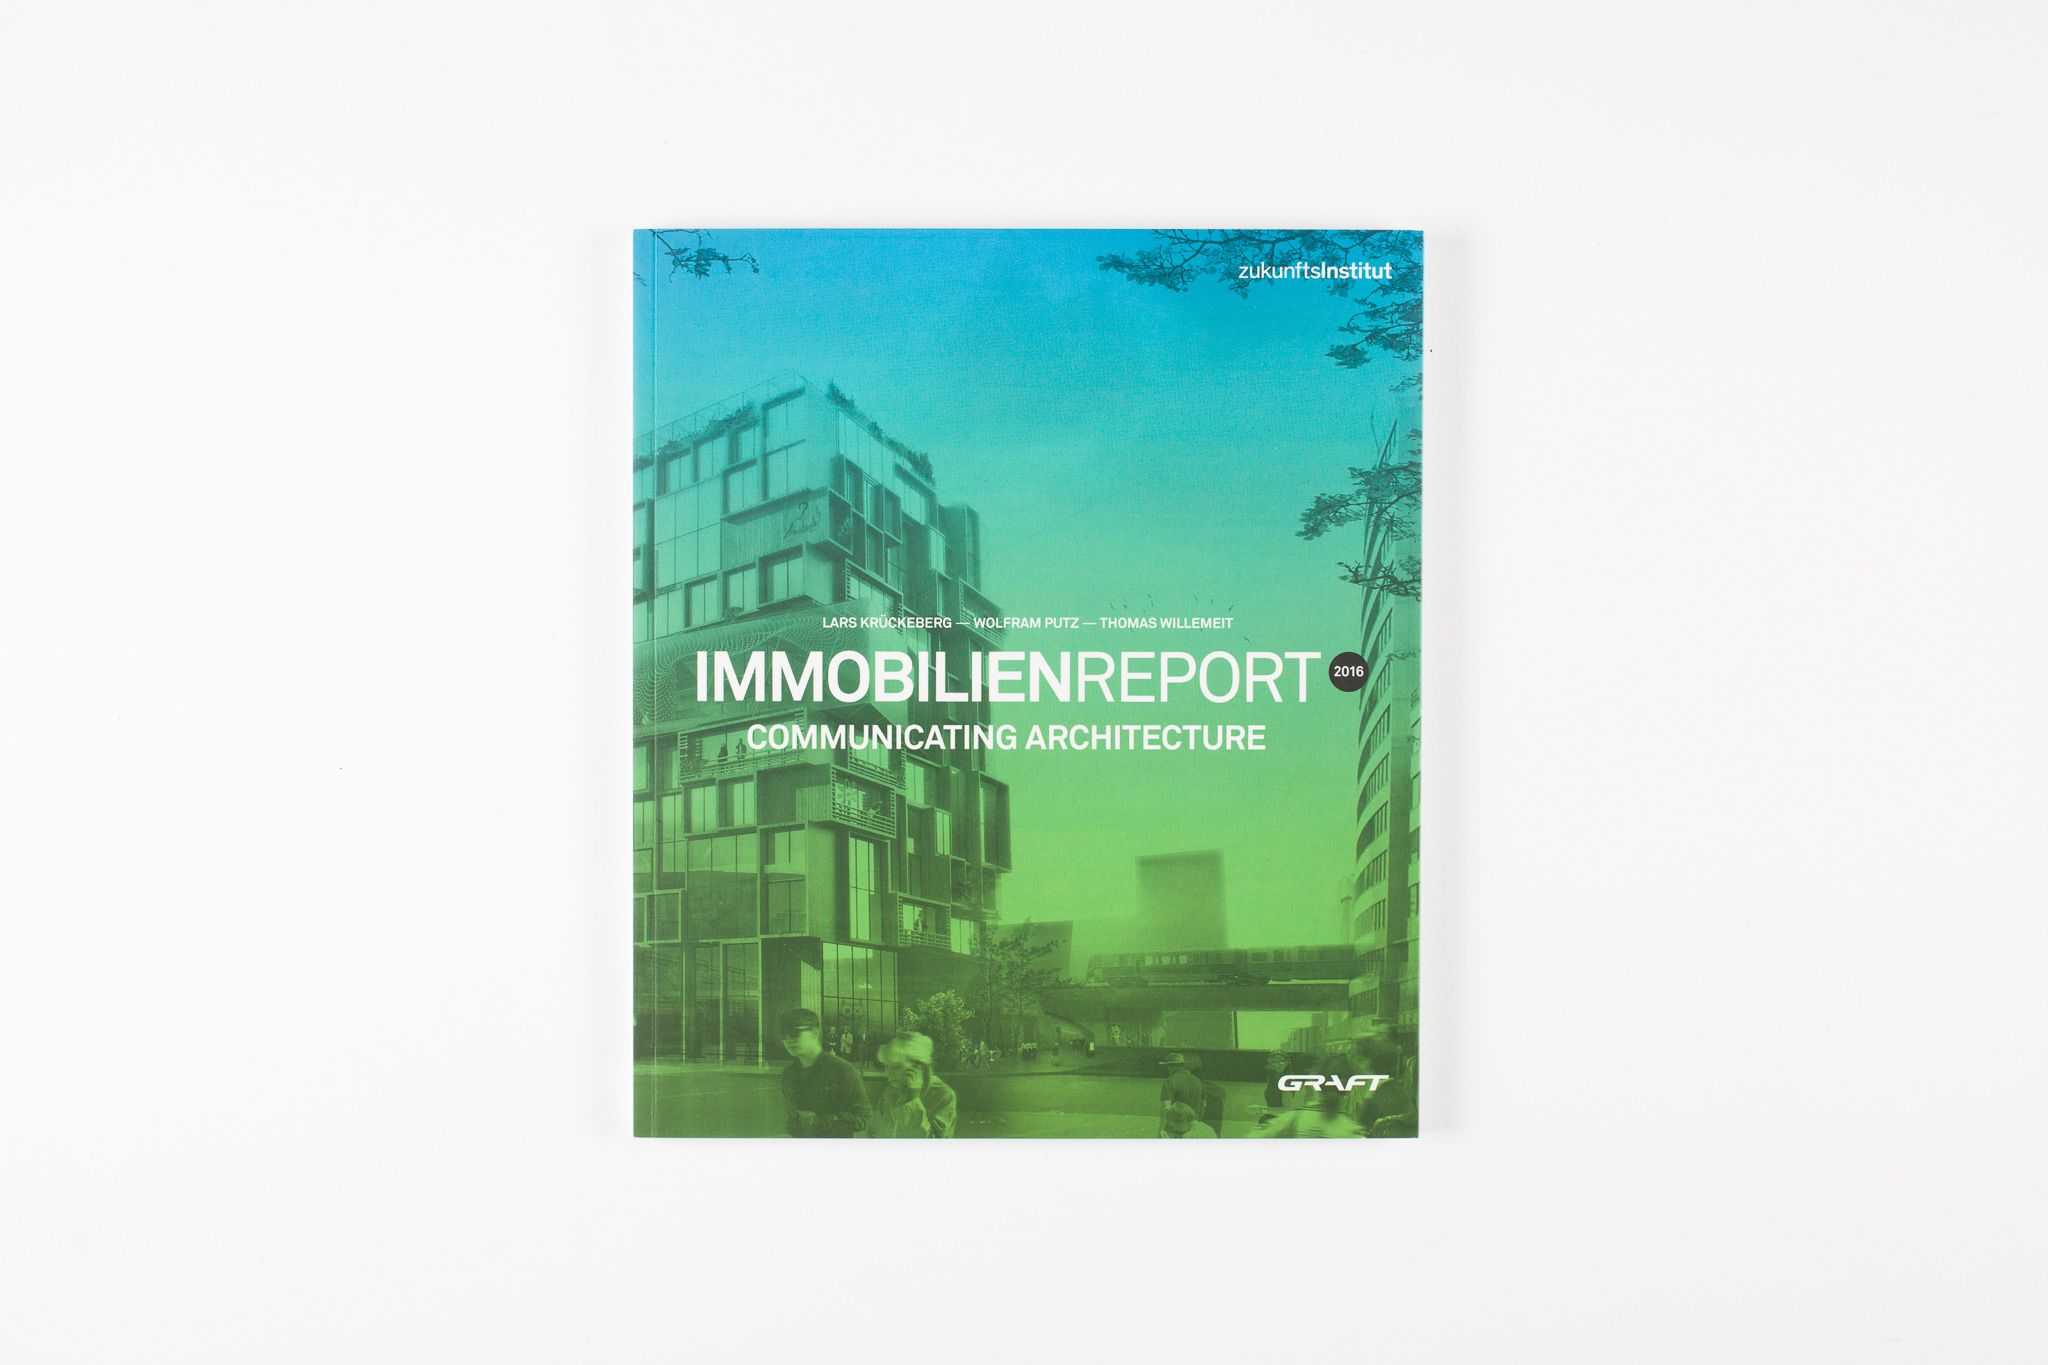 IMMOBILIEN REPORT 2016 – COMMUNICATING ARCHITECTURE